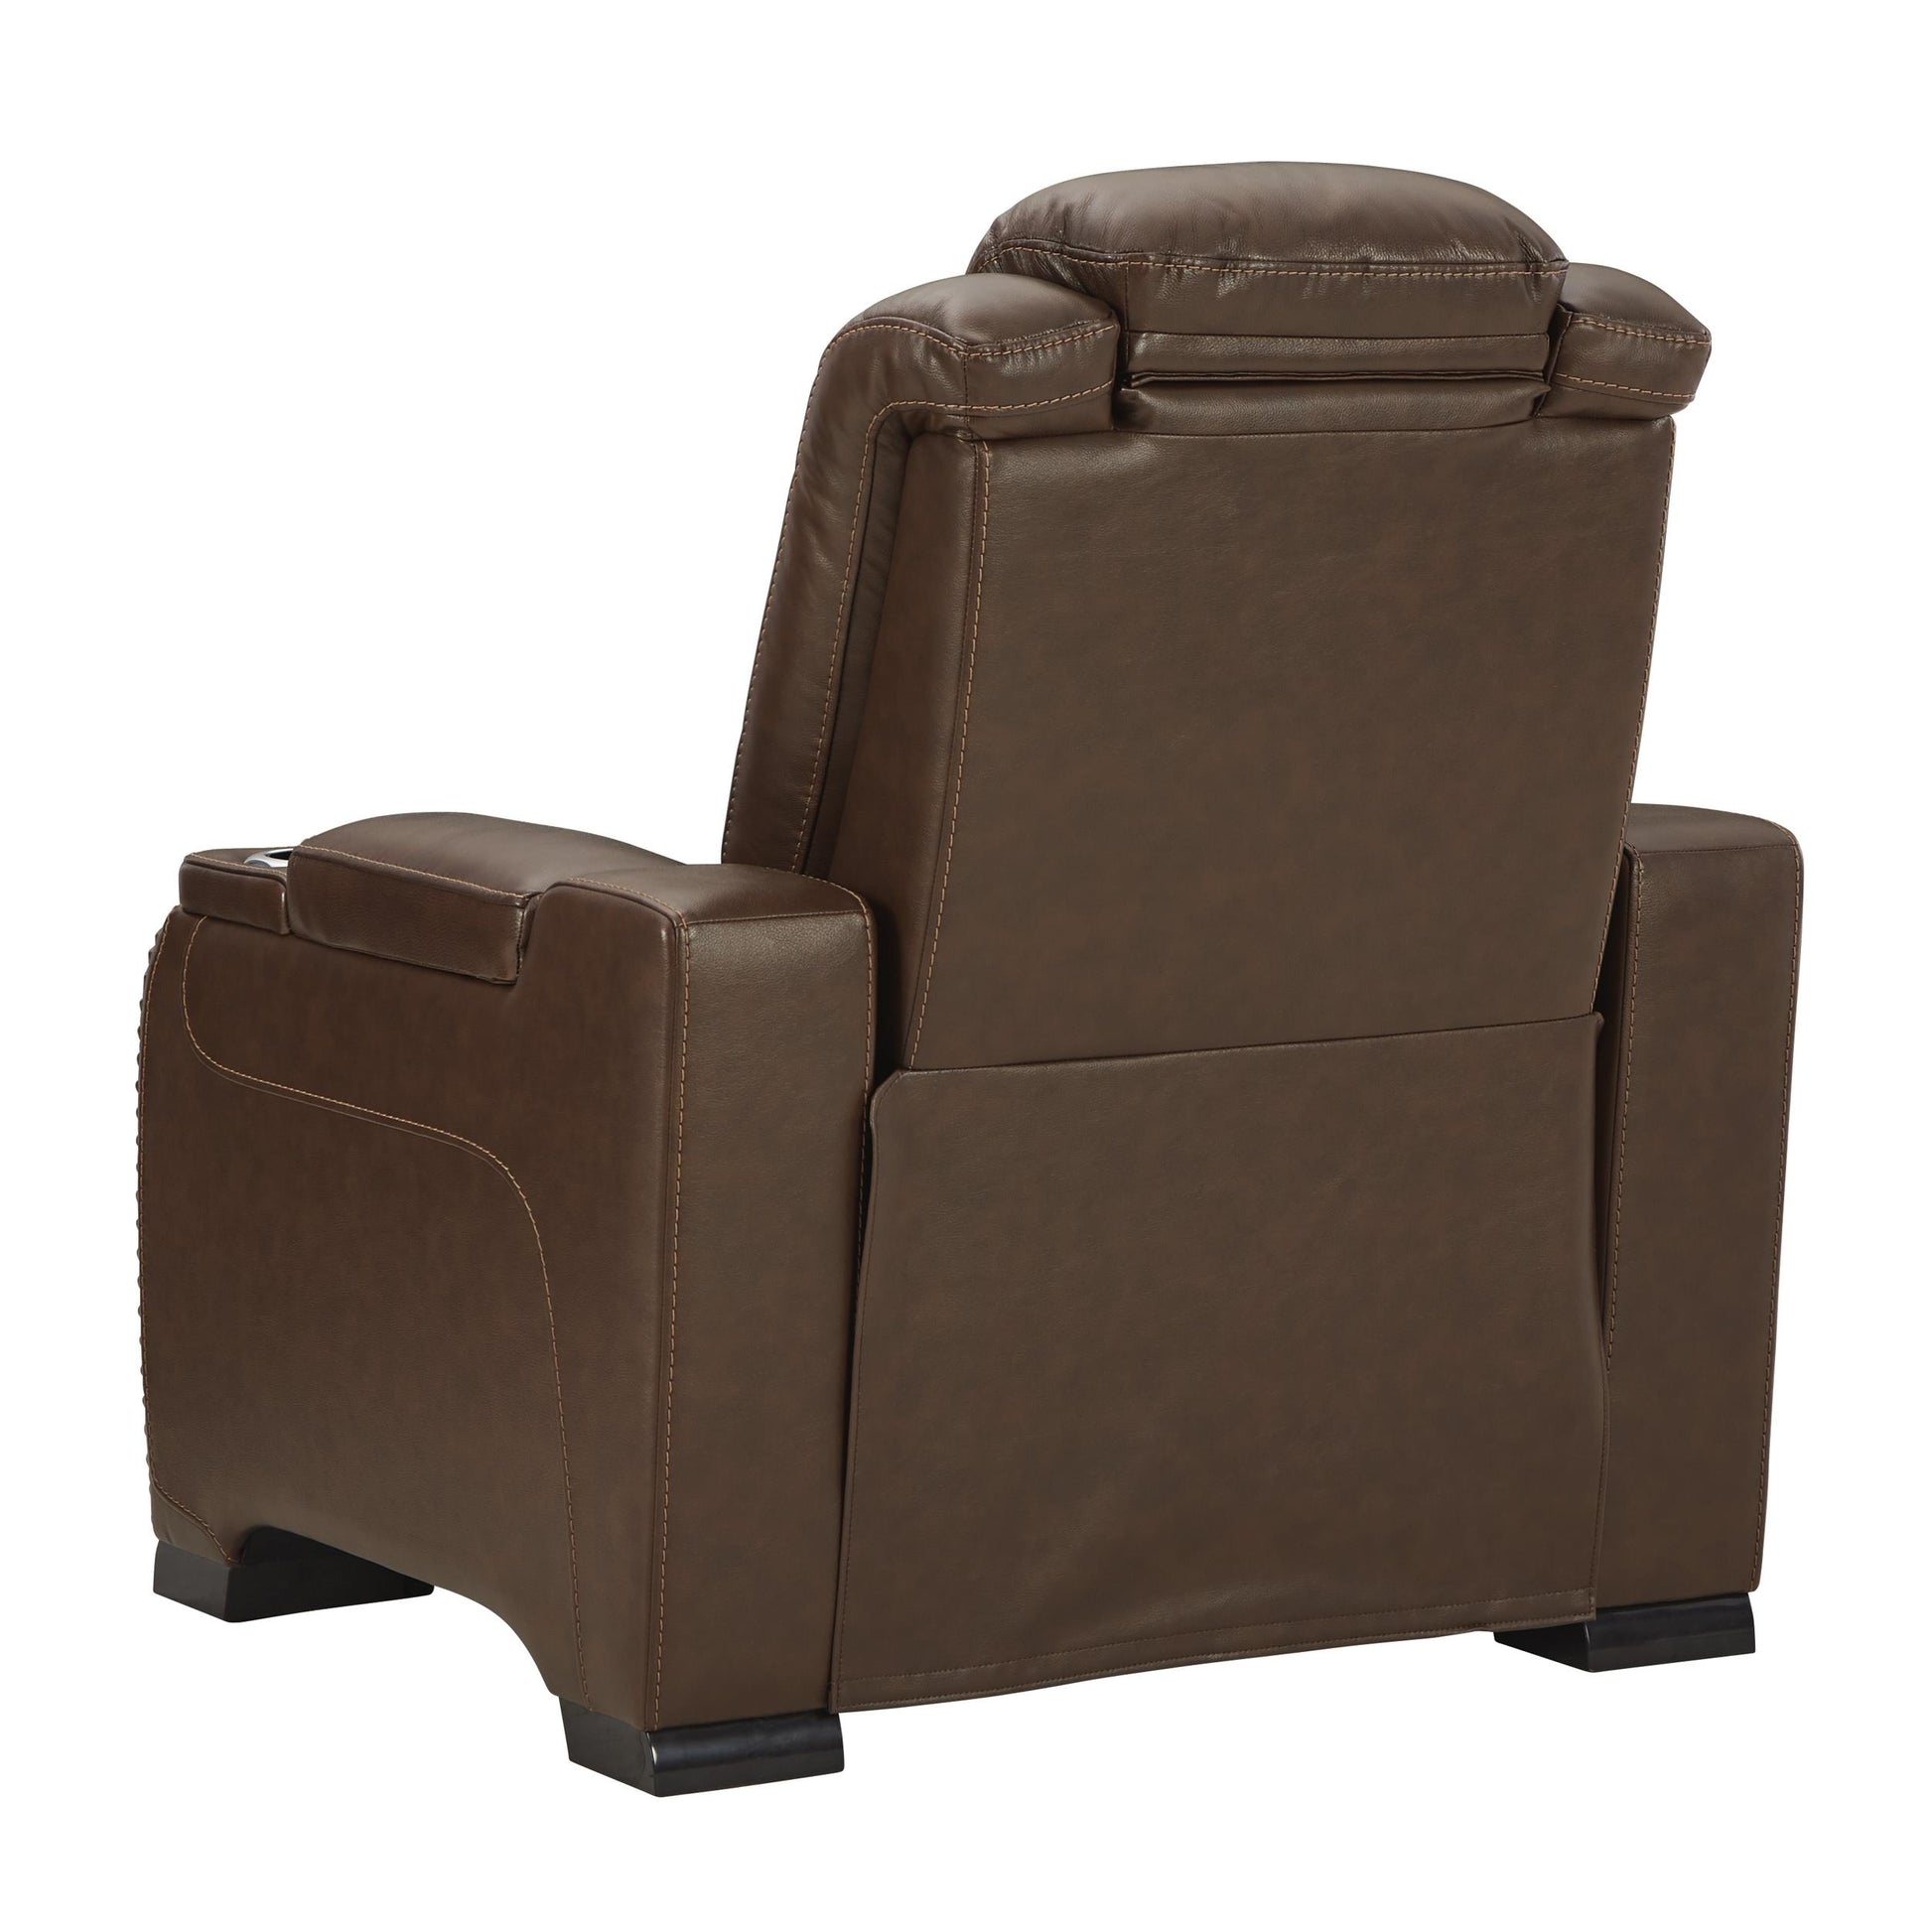 Signature Design by Ashley The Man-Den Power Leather Match Recliner U8530613 IMAGE 4